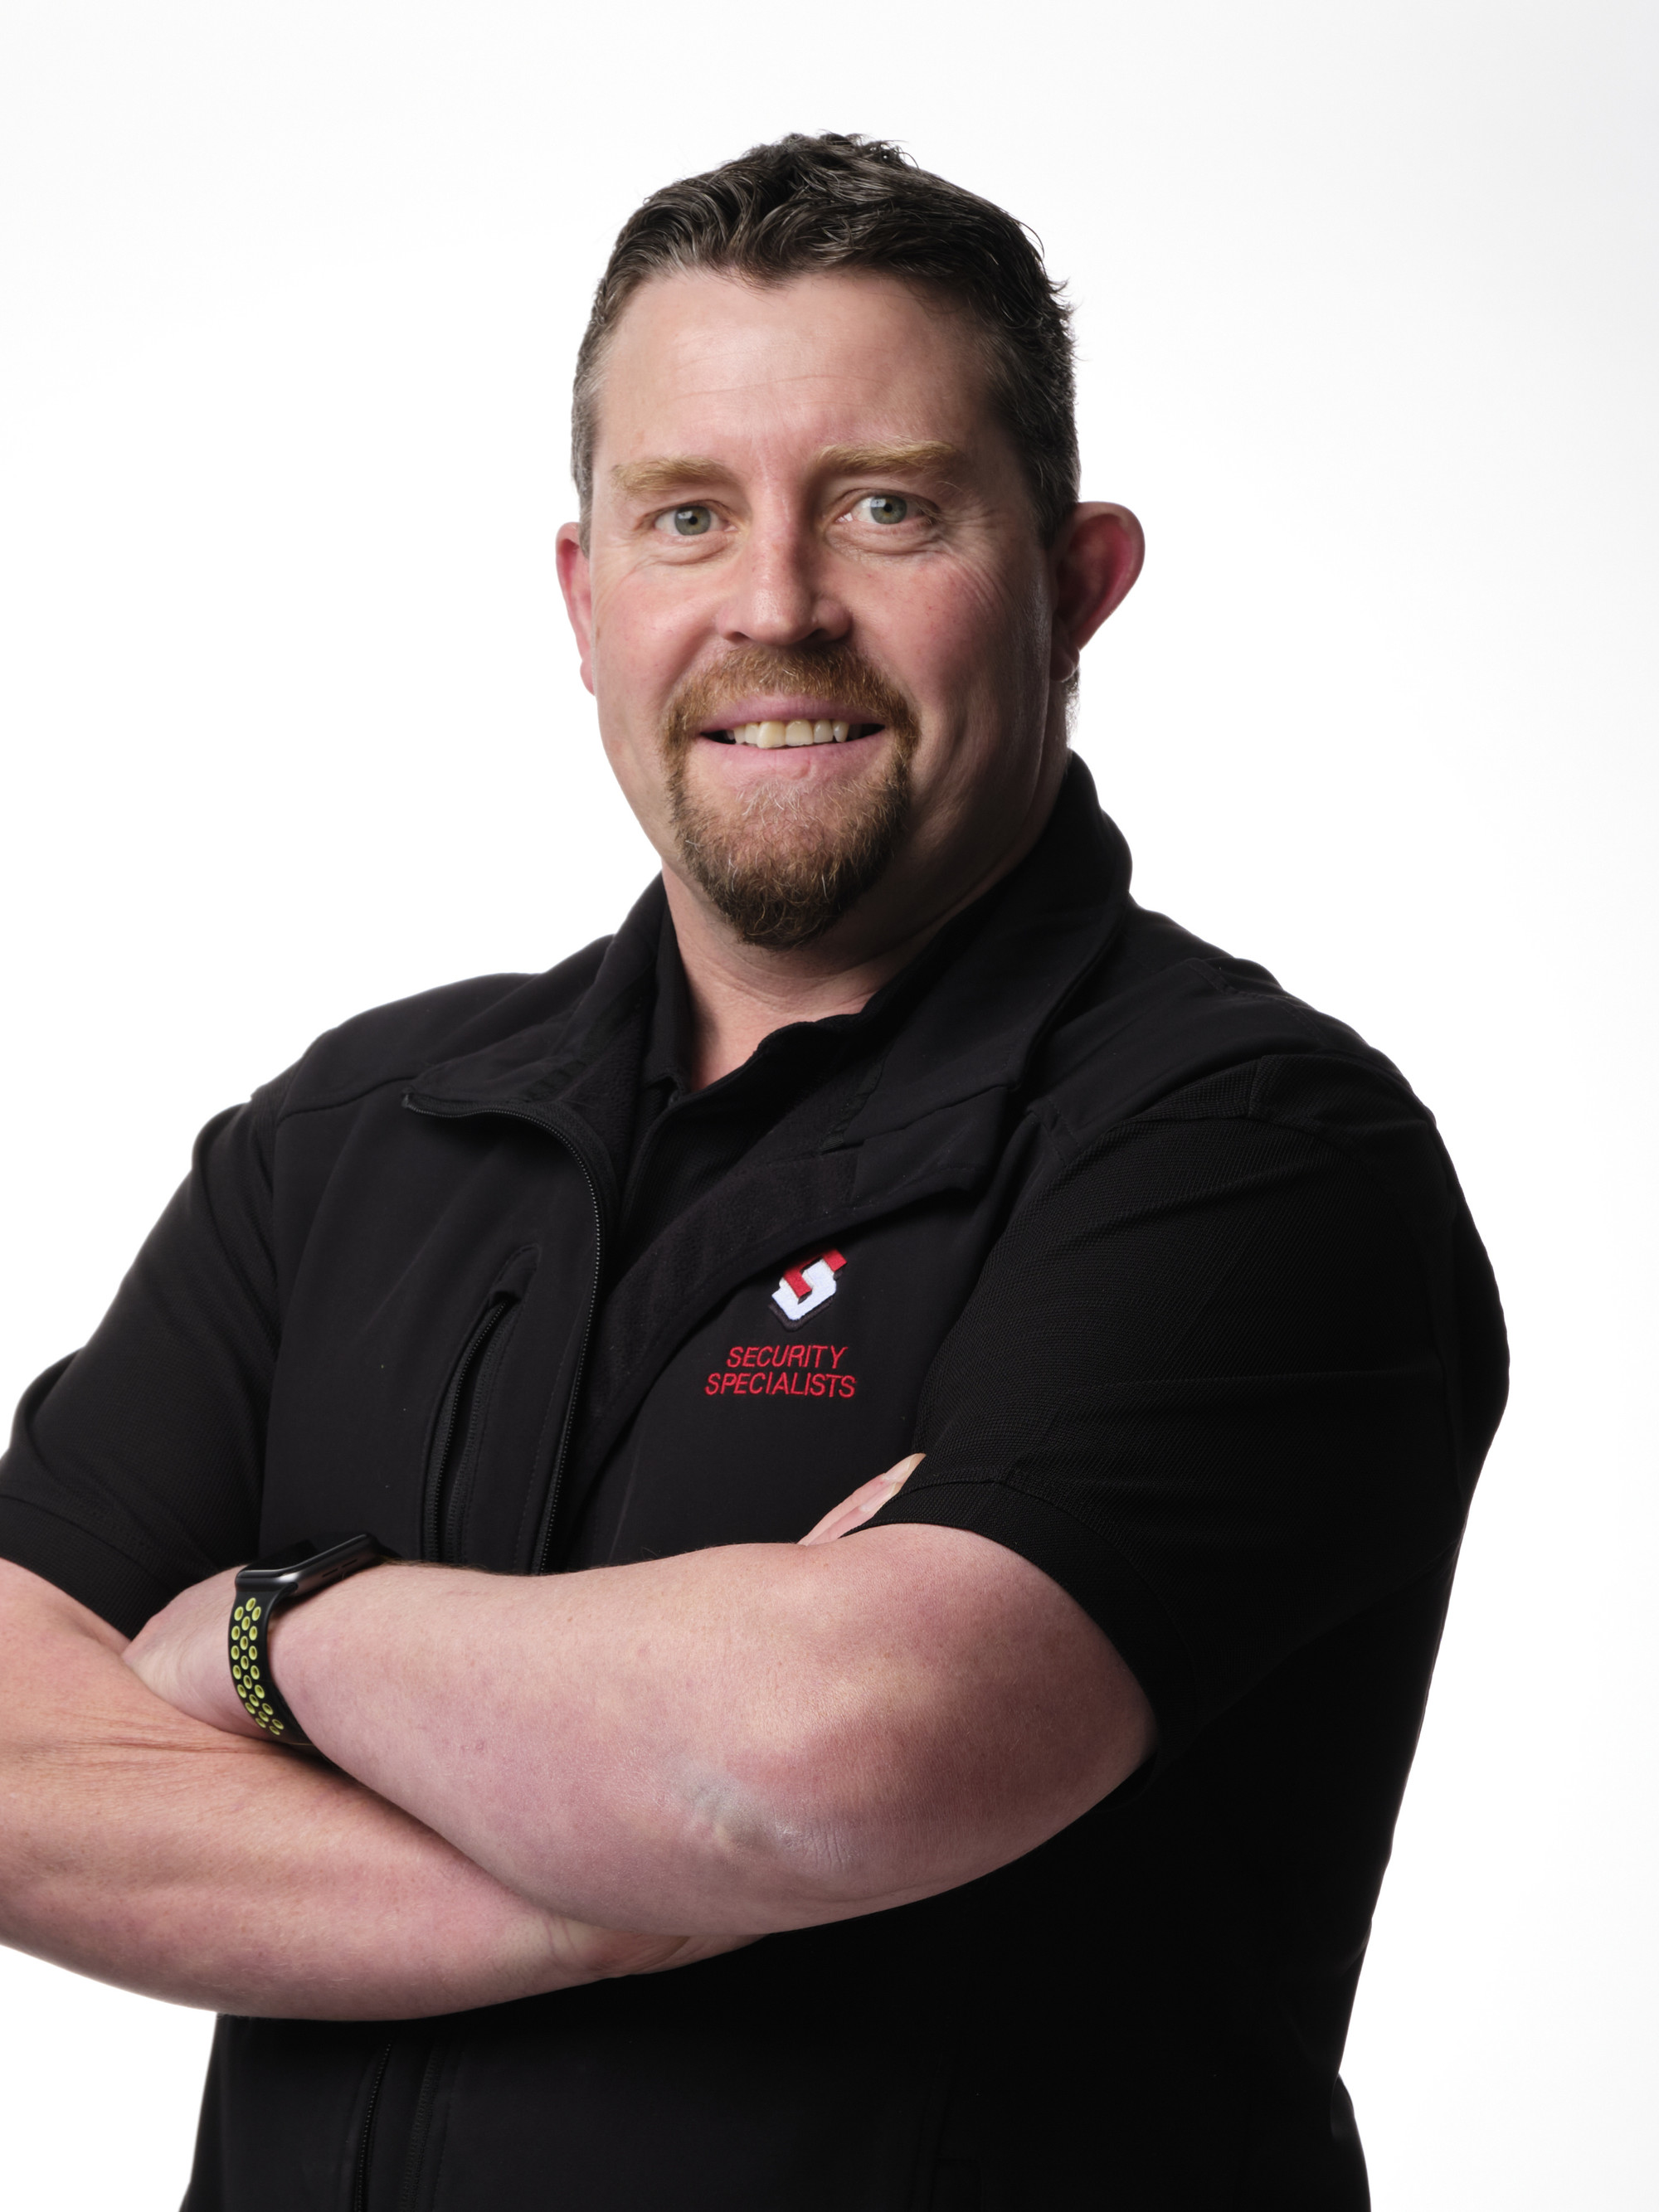 Paul Rowley - Dunedin Manager, Security Specialists